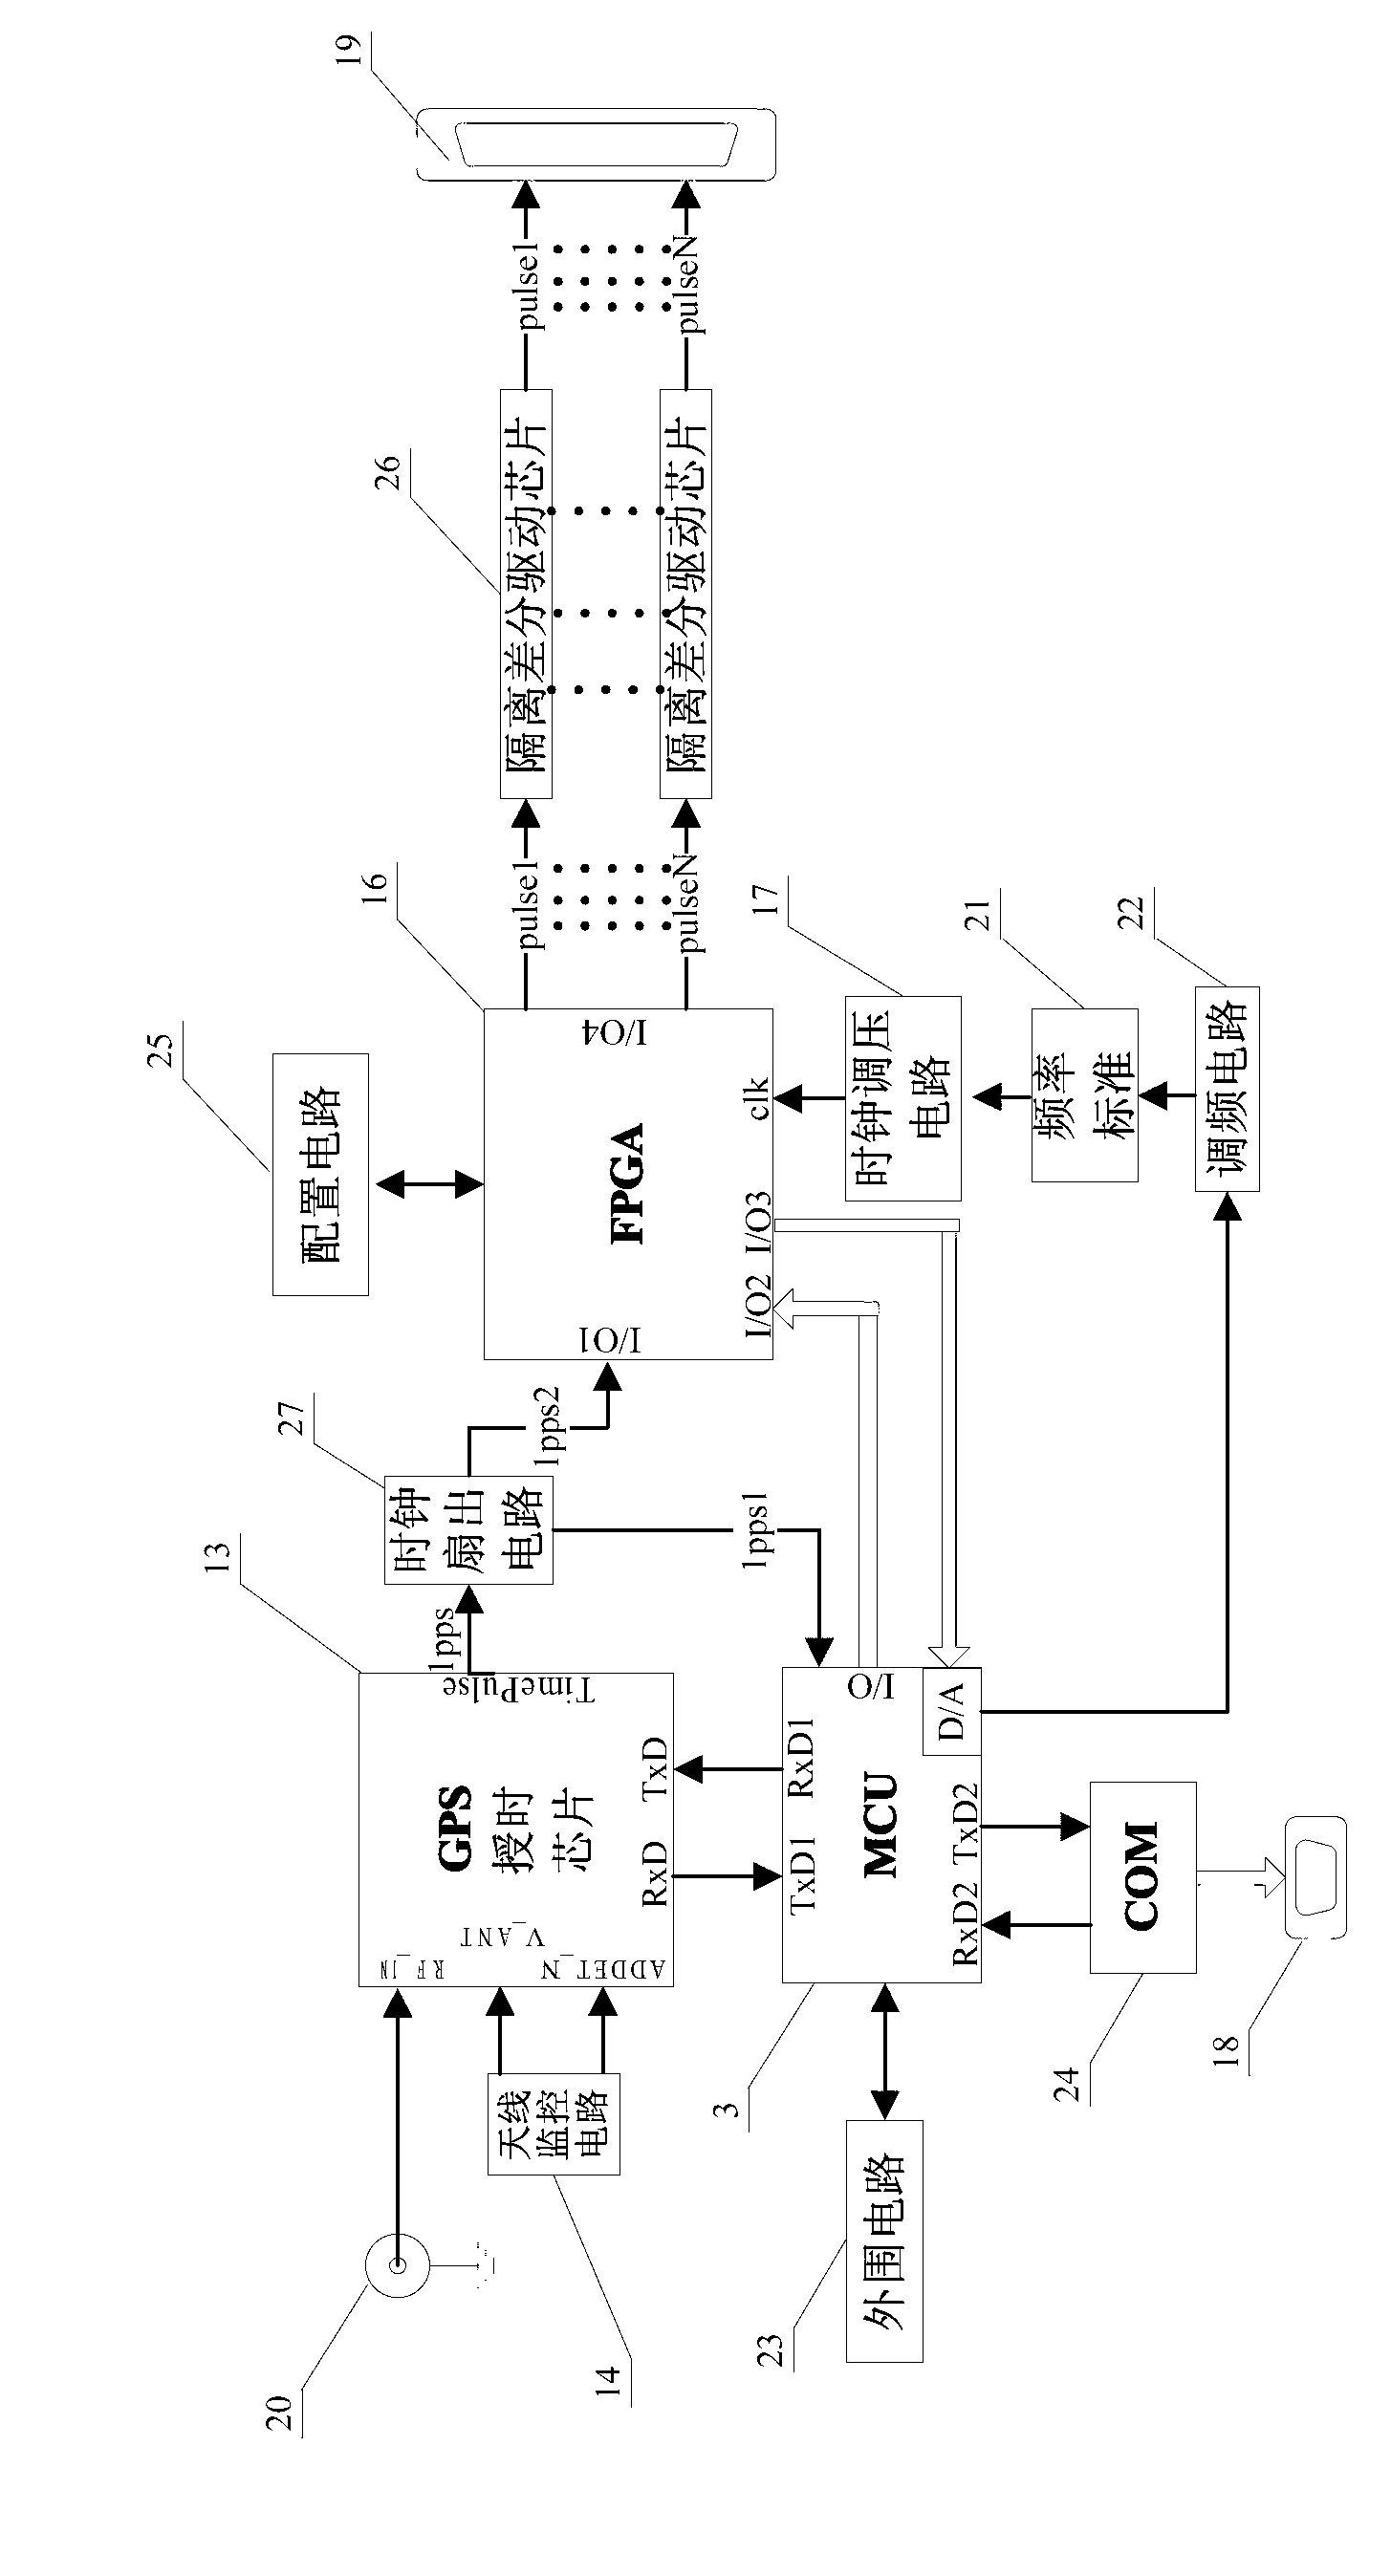 Time unification signal generating device based on GPS (Global Position System) signal source